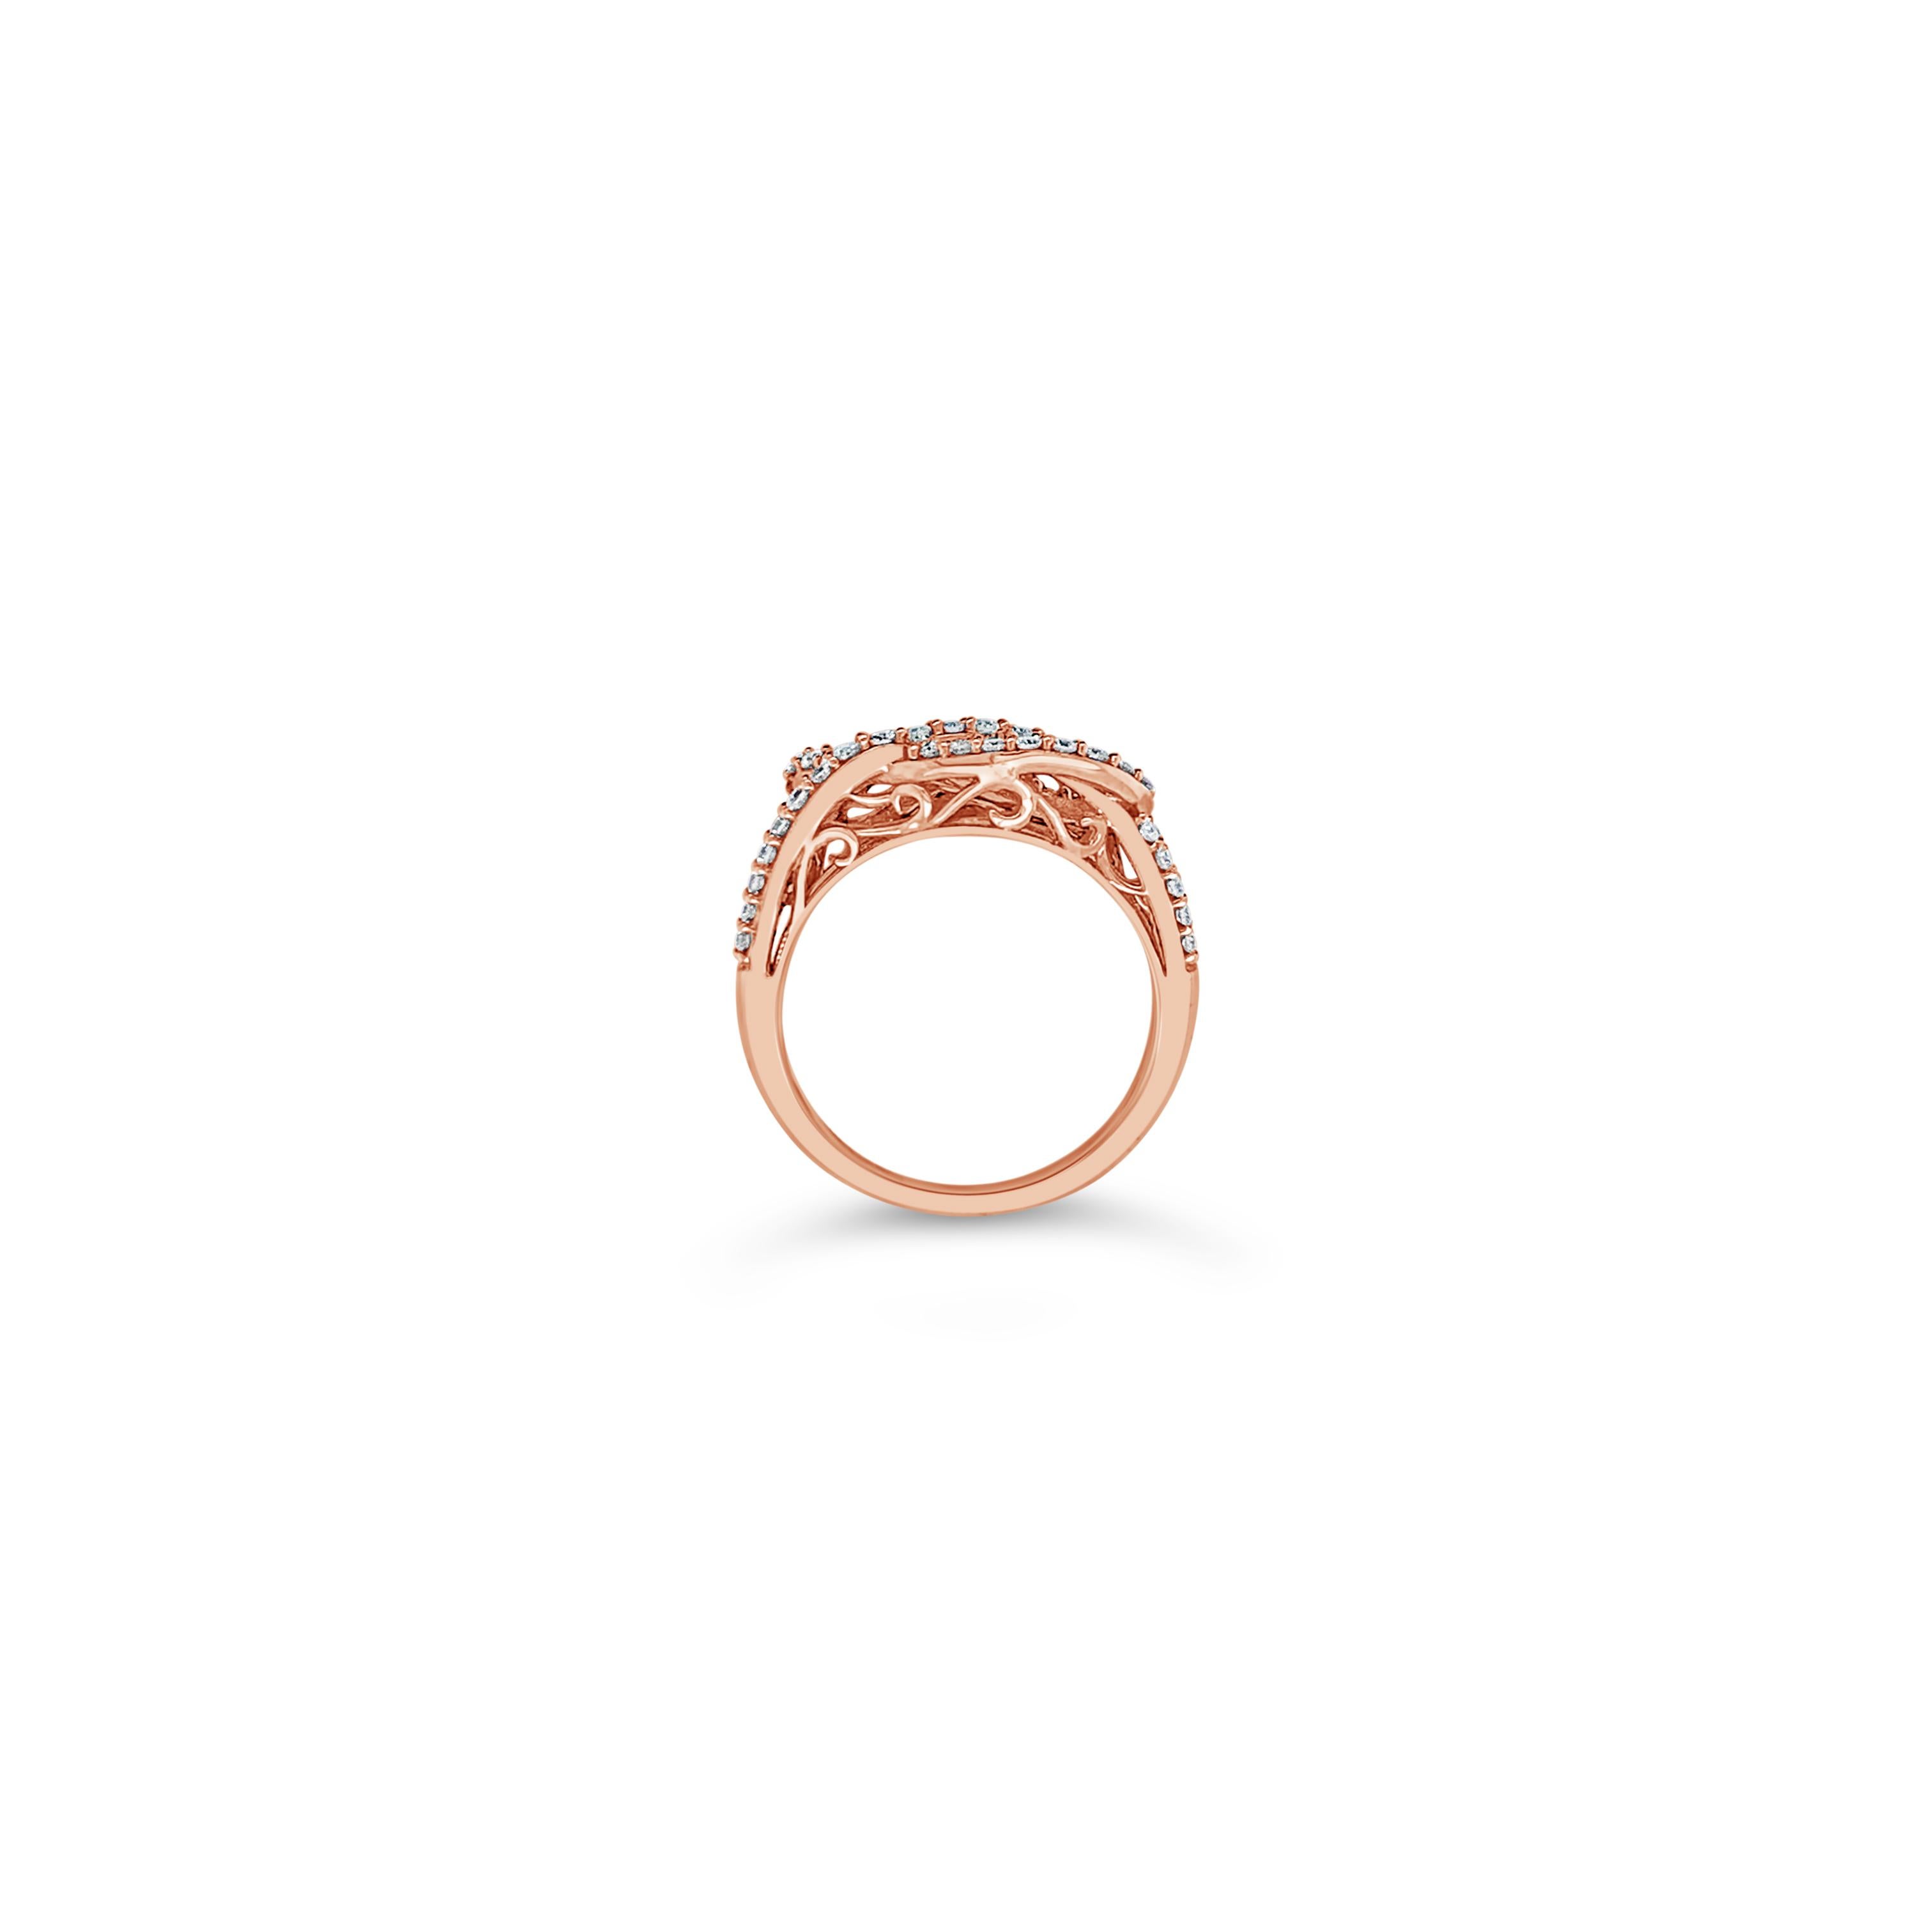 Le Vian® Ring featuring .68 cts. Vanilla Diamonds® set in 14K Strawberry Gold®

Diamonds Breakdown:
.68 cts White Diamonds

Gems Breakdown:
None

Ring may or may not be sizable, please feel free to reach out with any questions!

Item comes with a Le